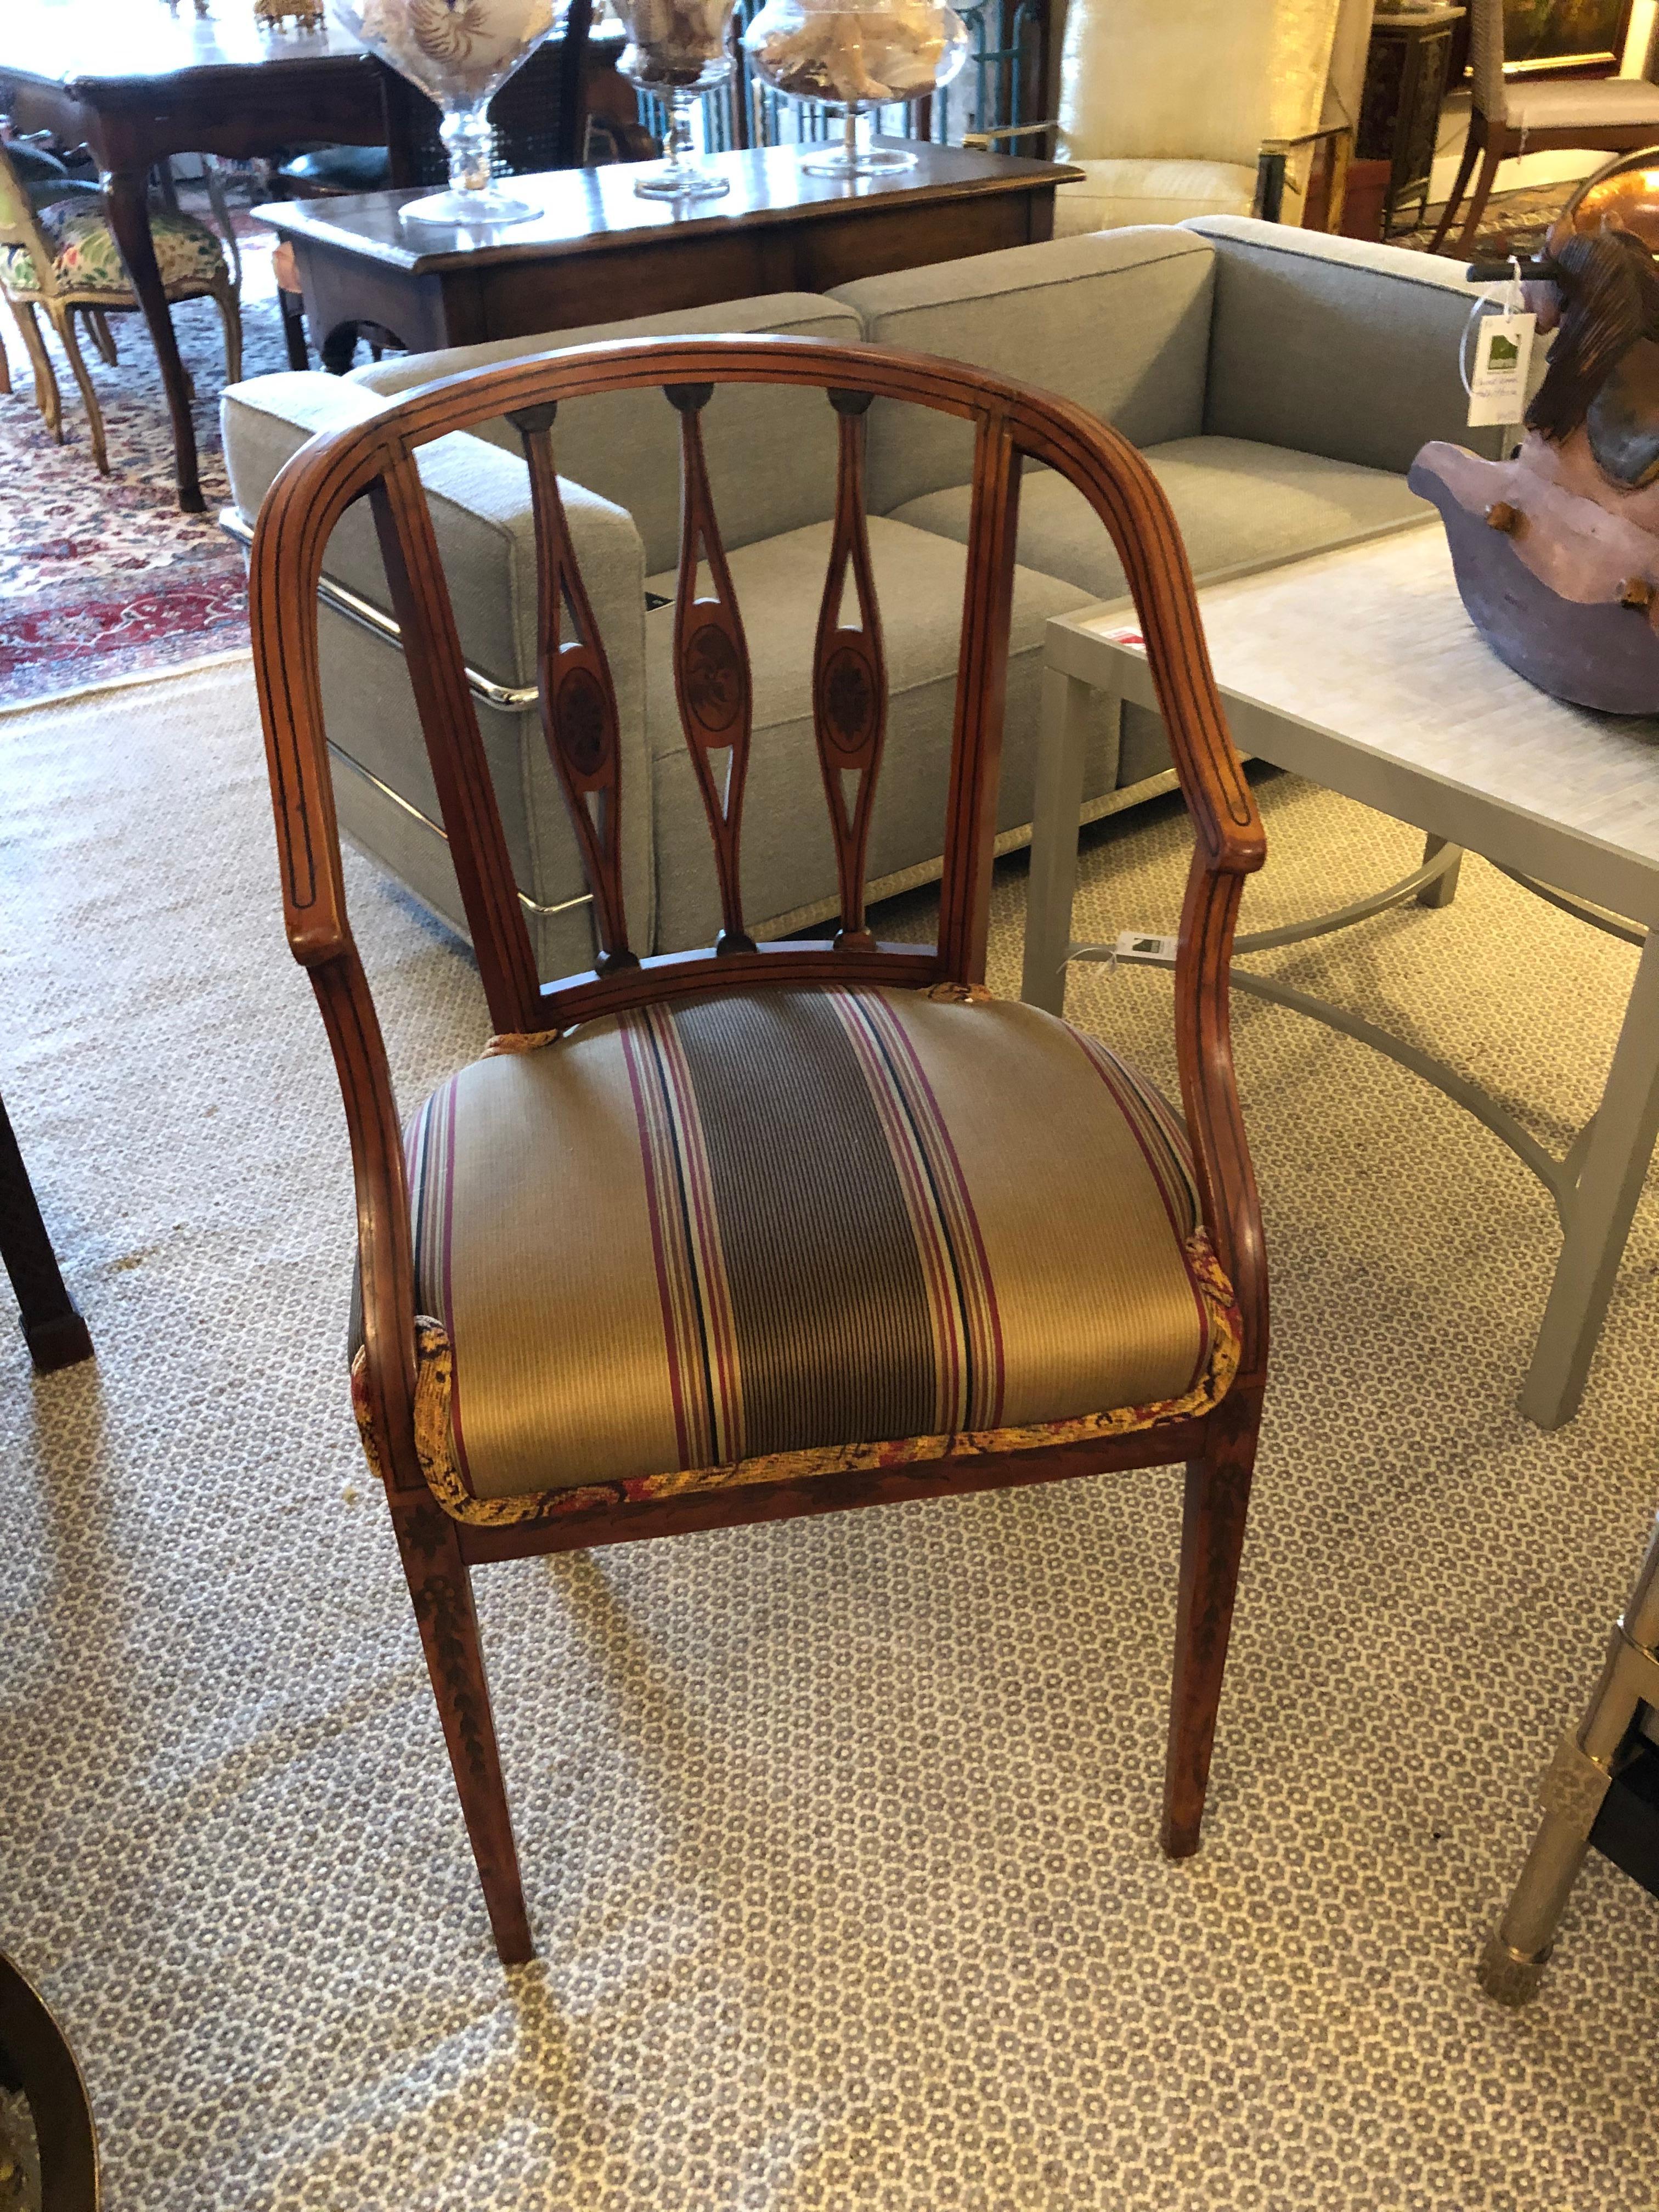 Lovely Curved French Fruitwood Inlaid Salon or Desk Chair In Good Condition For Sale In Hopewell, NJ